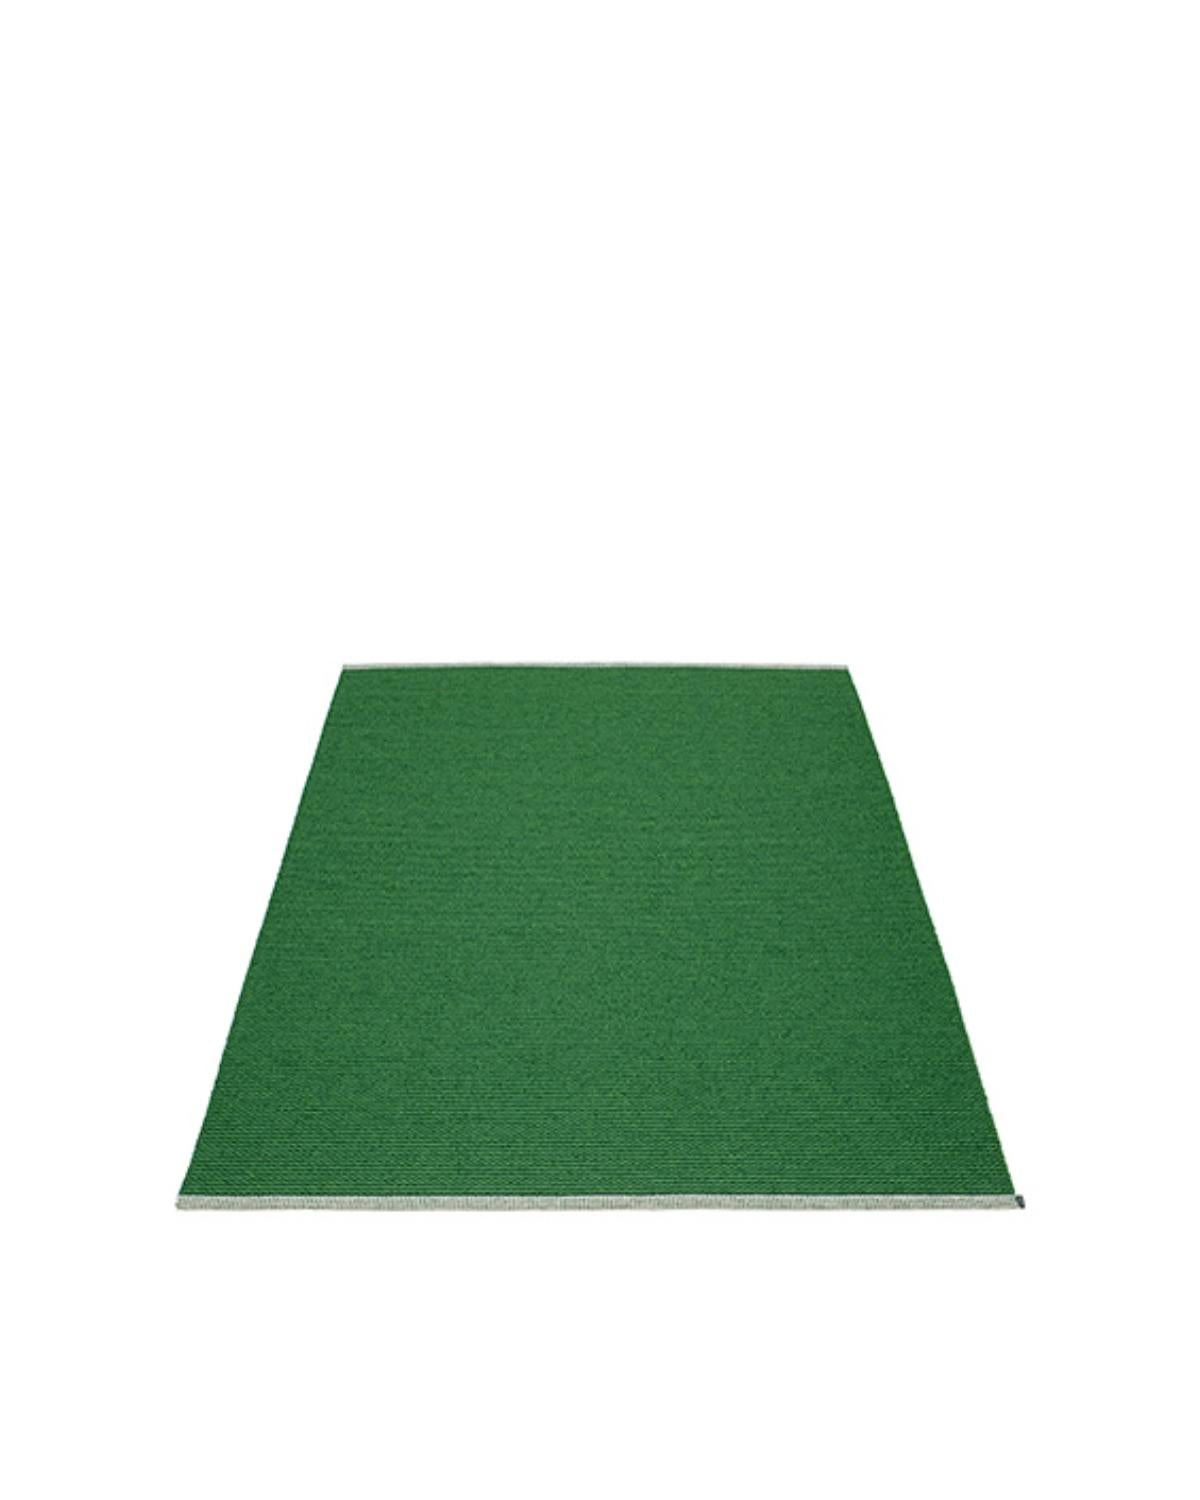 Pappelina Rug MONO Grass Green 4.5 x 6.5 ft  image 1